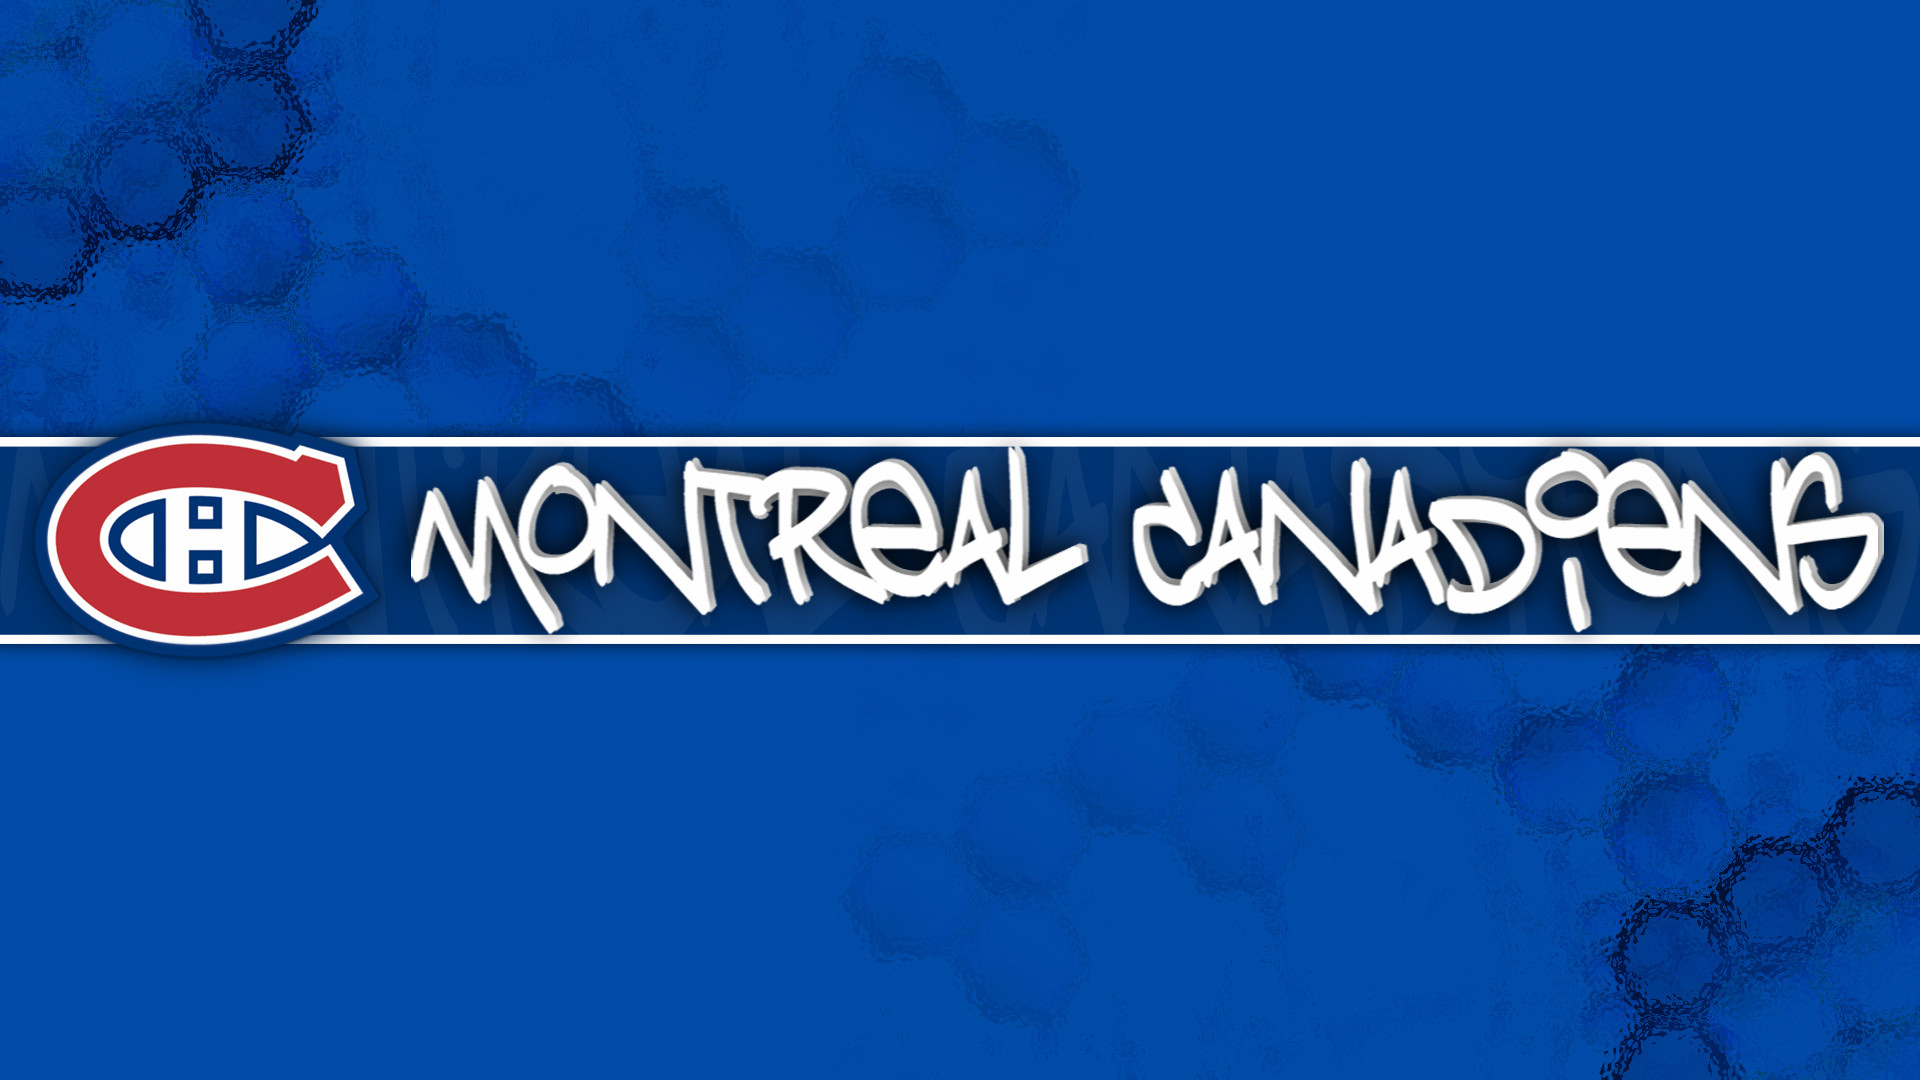 1920x1080 Widescreen Wallpapers of Montreal Canadiens Logo, Amazing Images